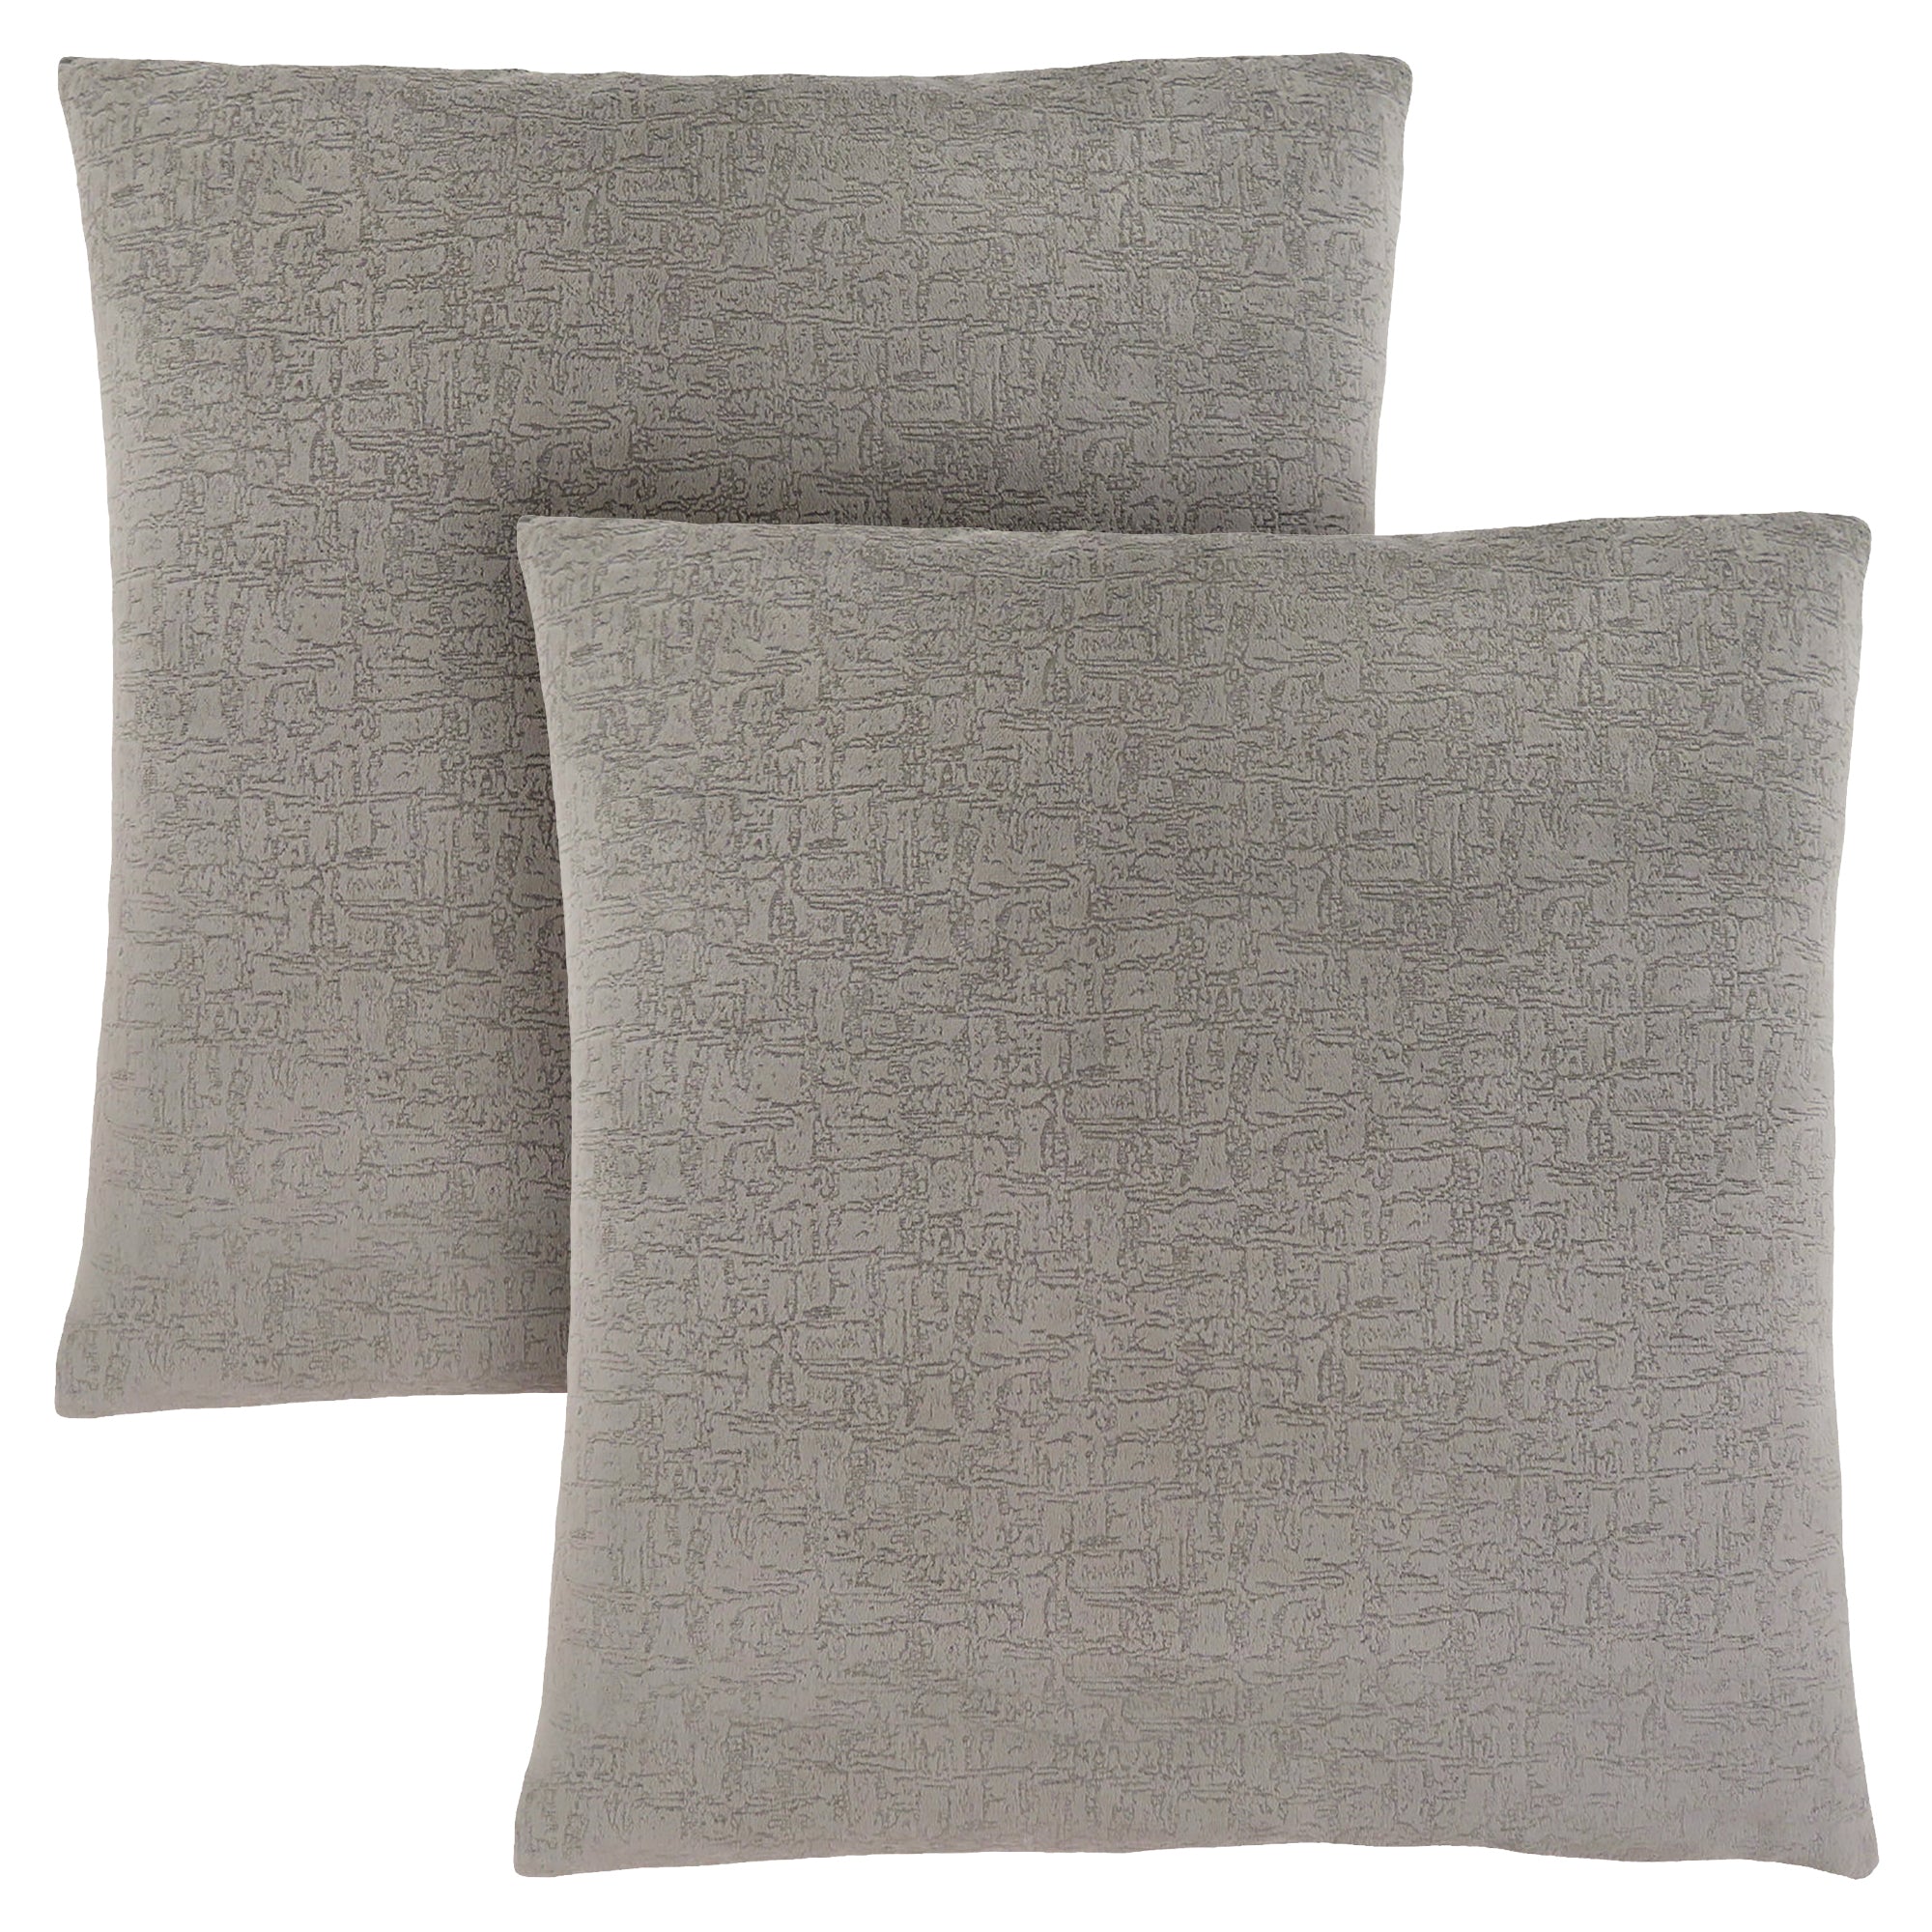 MN-719273    Pillows, Set Of 2, 18 X 18 Square, Insert Included, Decorative Throw, Accent, Sofa, Couch, Bed, Plush Velvet Finish, Soft Polyester Fabric, Hypoallergenic Soft Polyester Insert, Grey, Contemporary, Modern